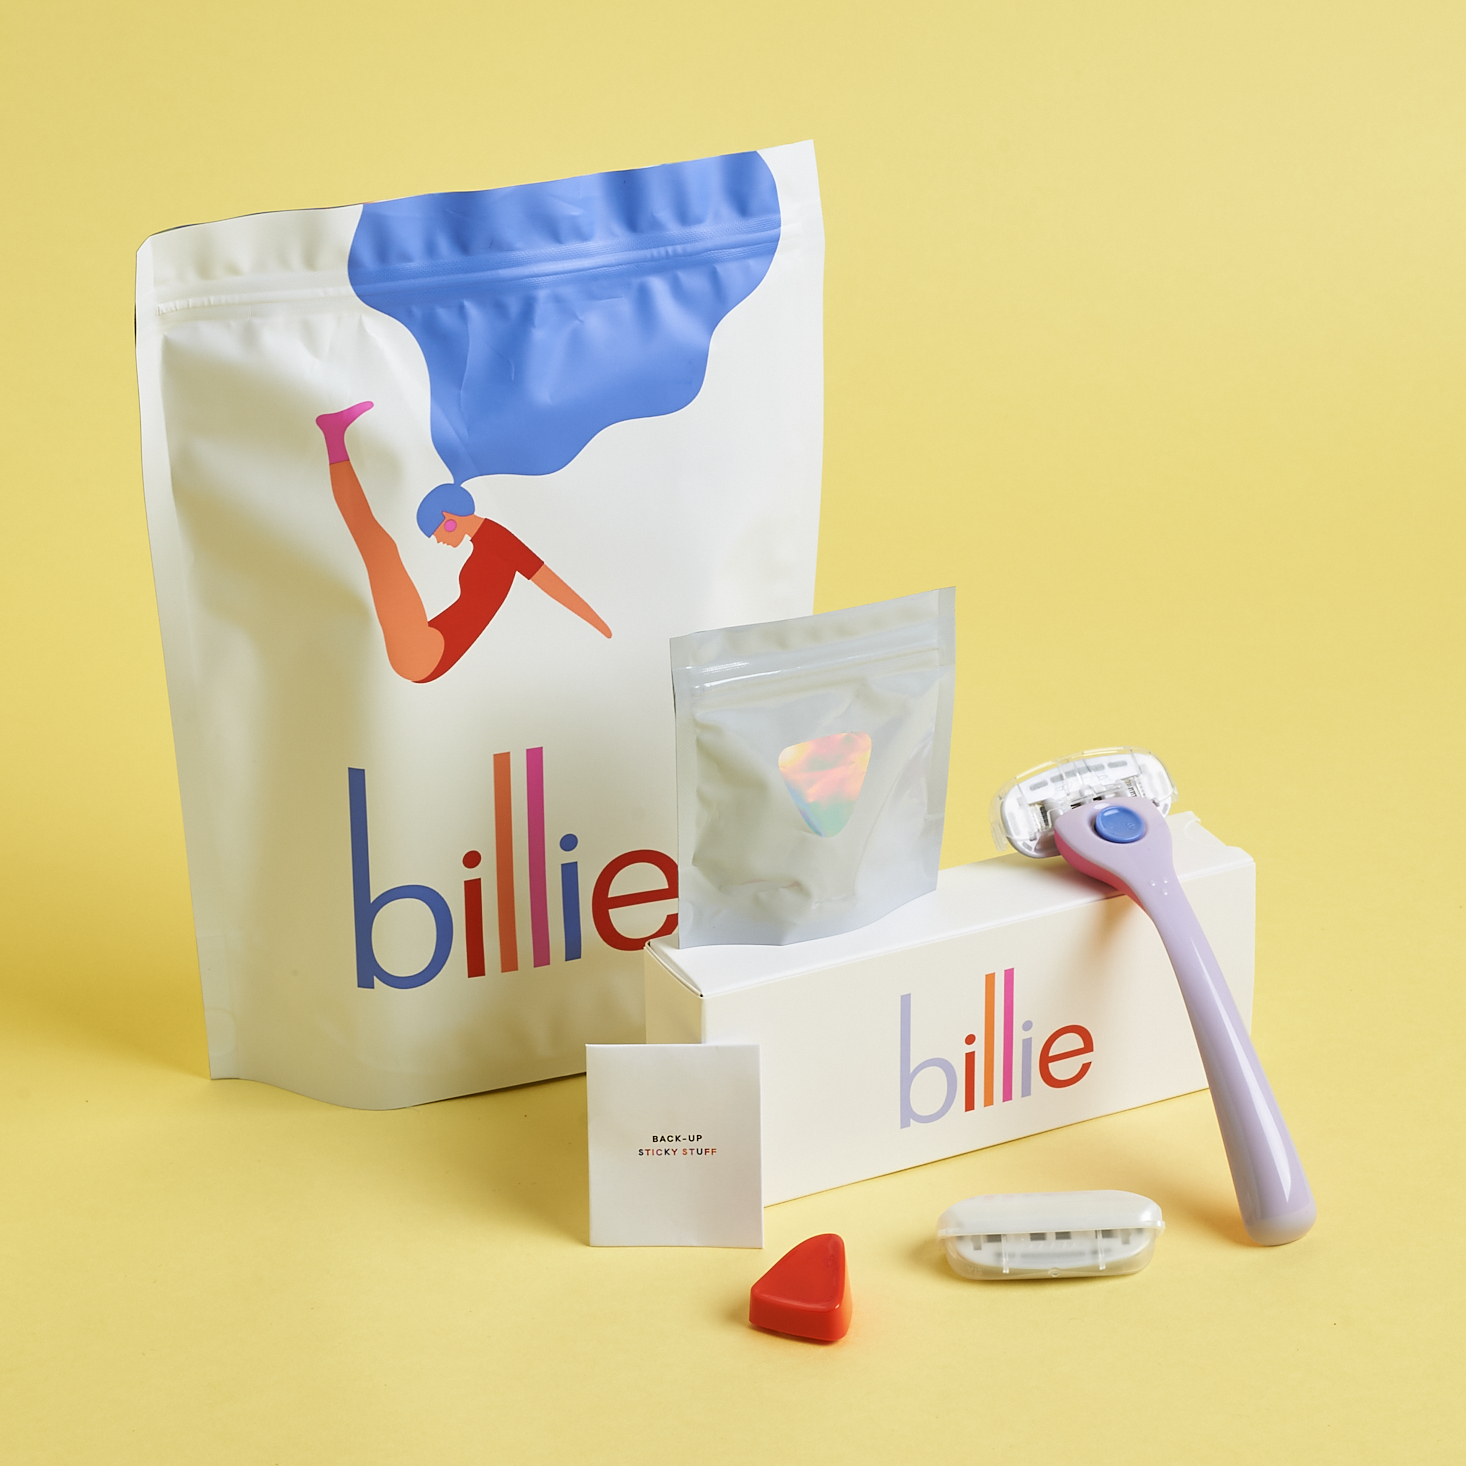 Billie Review – The Sustainable Razor Blade Subscription for Women That Calls for an End to the Pink Tax